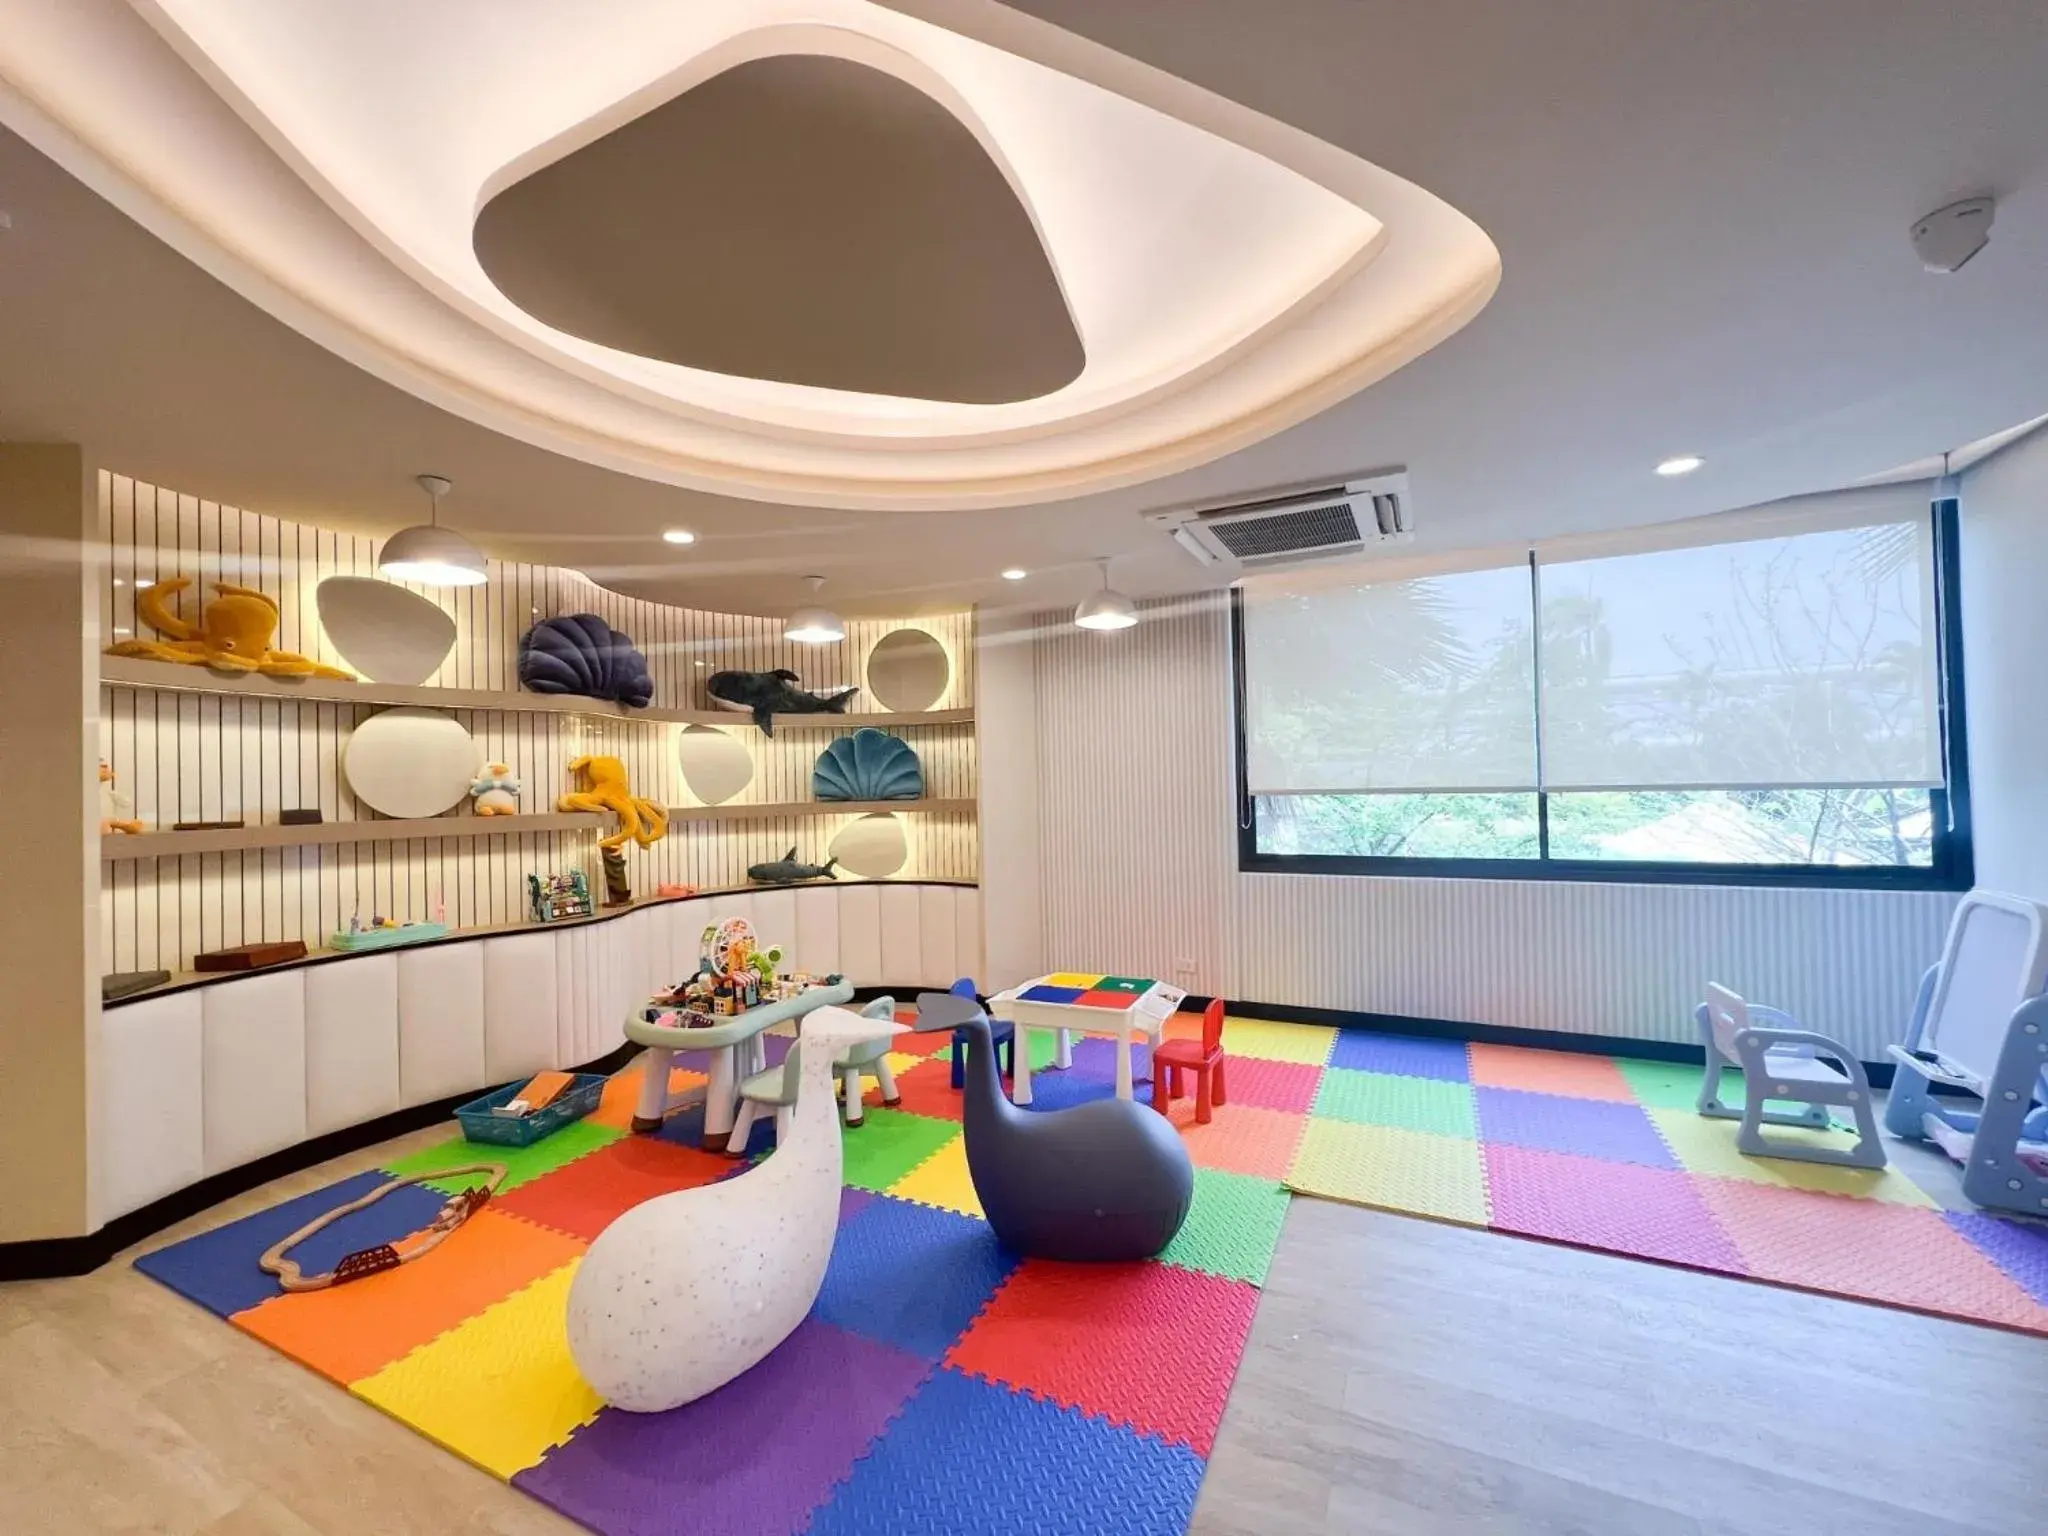 Kids's club in Novotel Rayong Star Convention Centre